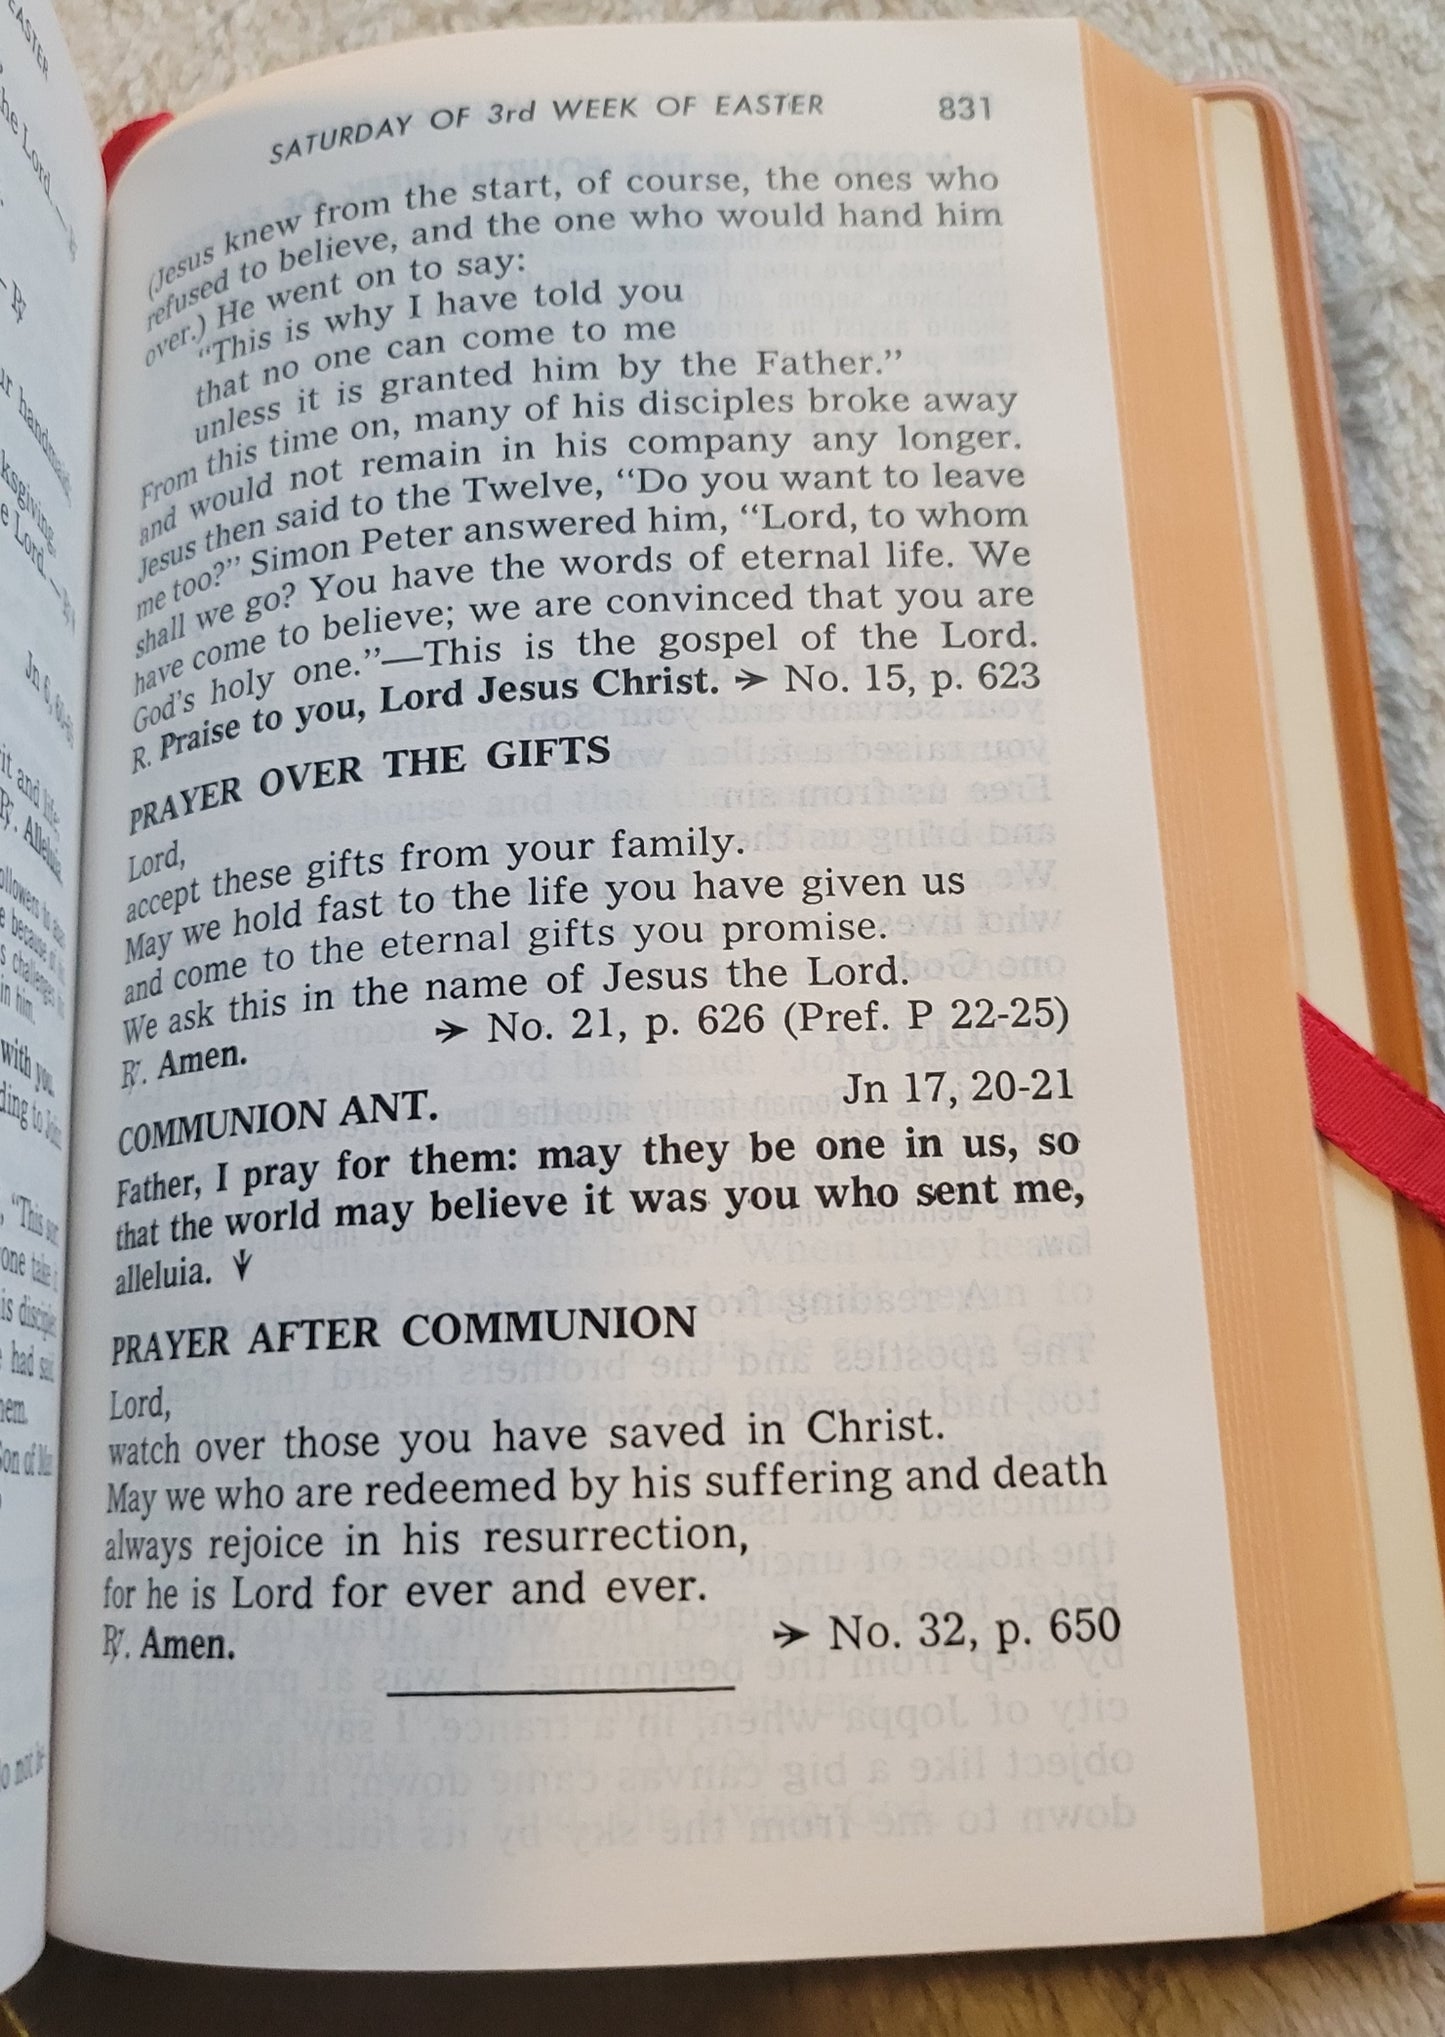 Vintage book for sale, "New....St. Joseph Weekday Missal Vol 1: Advent to Pentecost" Complete Edition, by the Catholic Book Publishing Company, "In accordance with Vatican II". View of page 831.